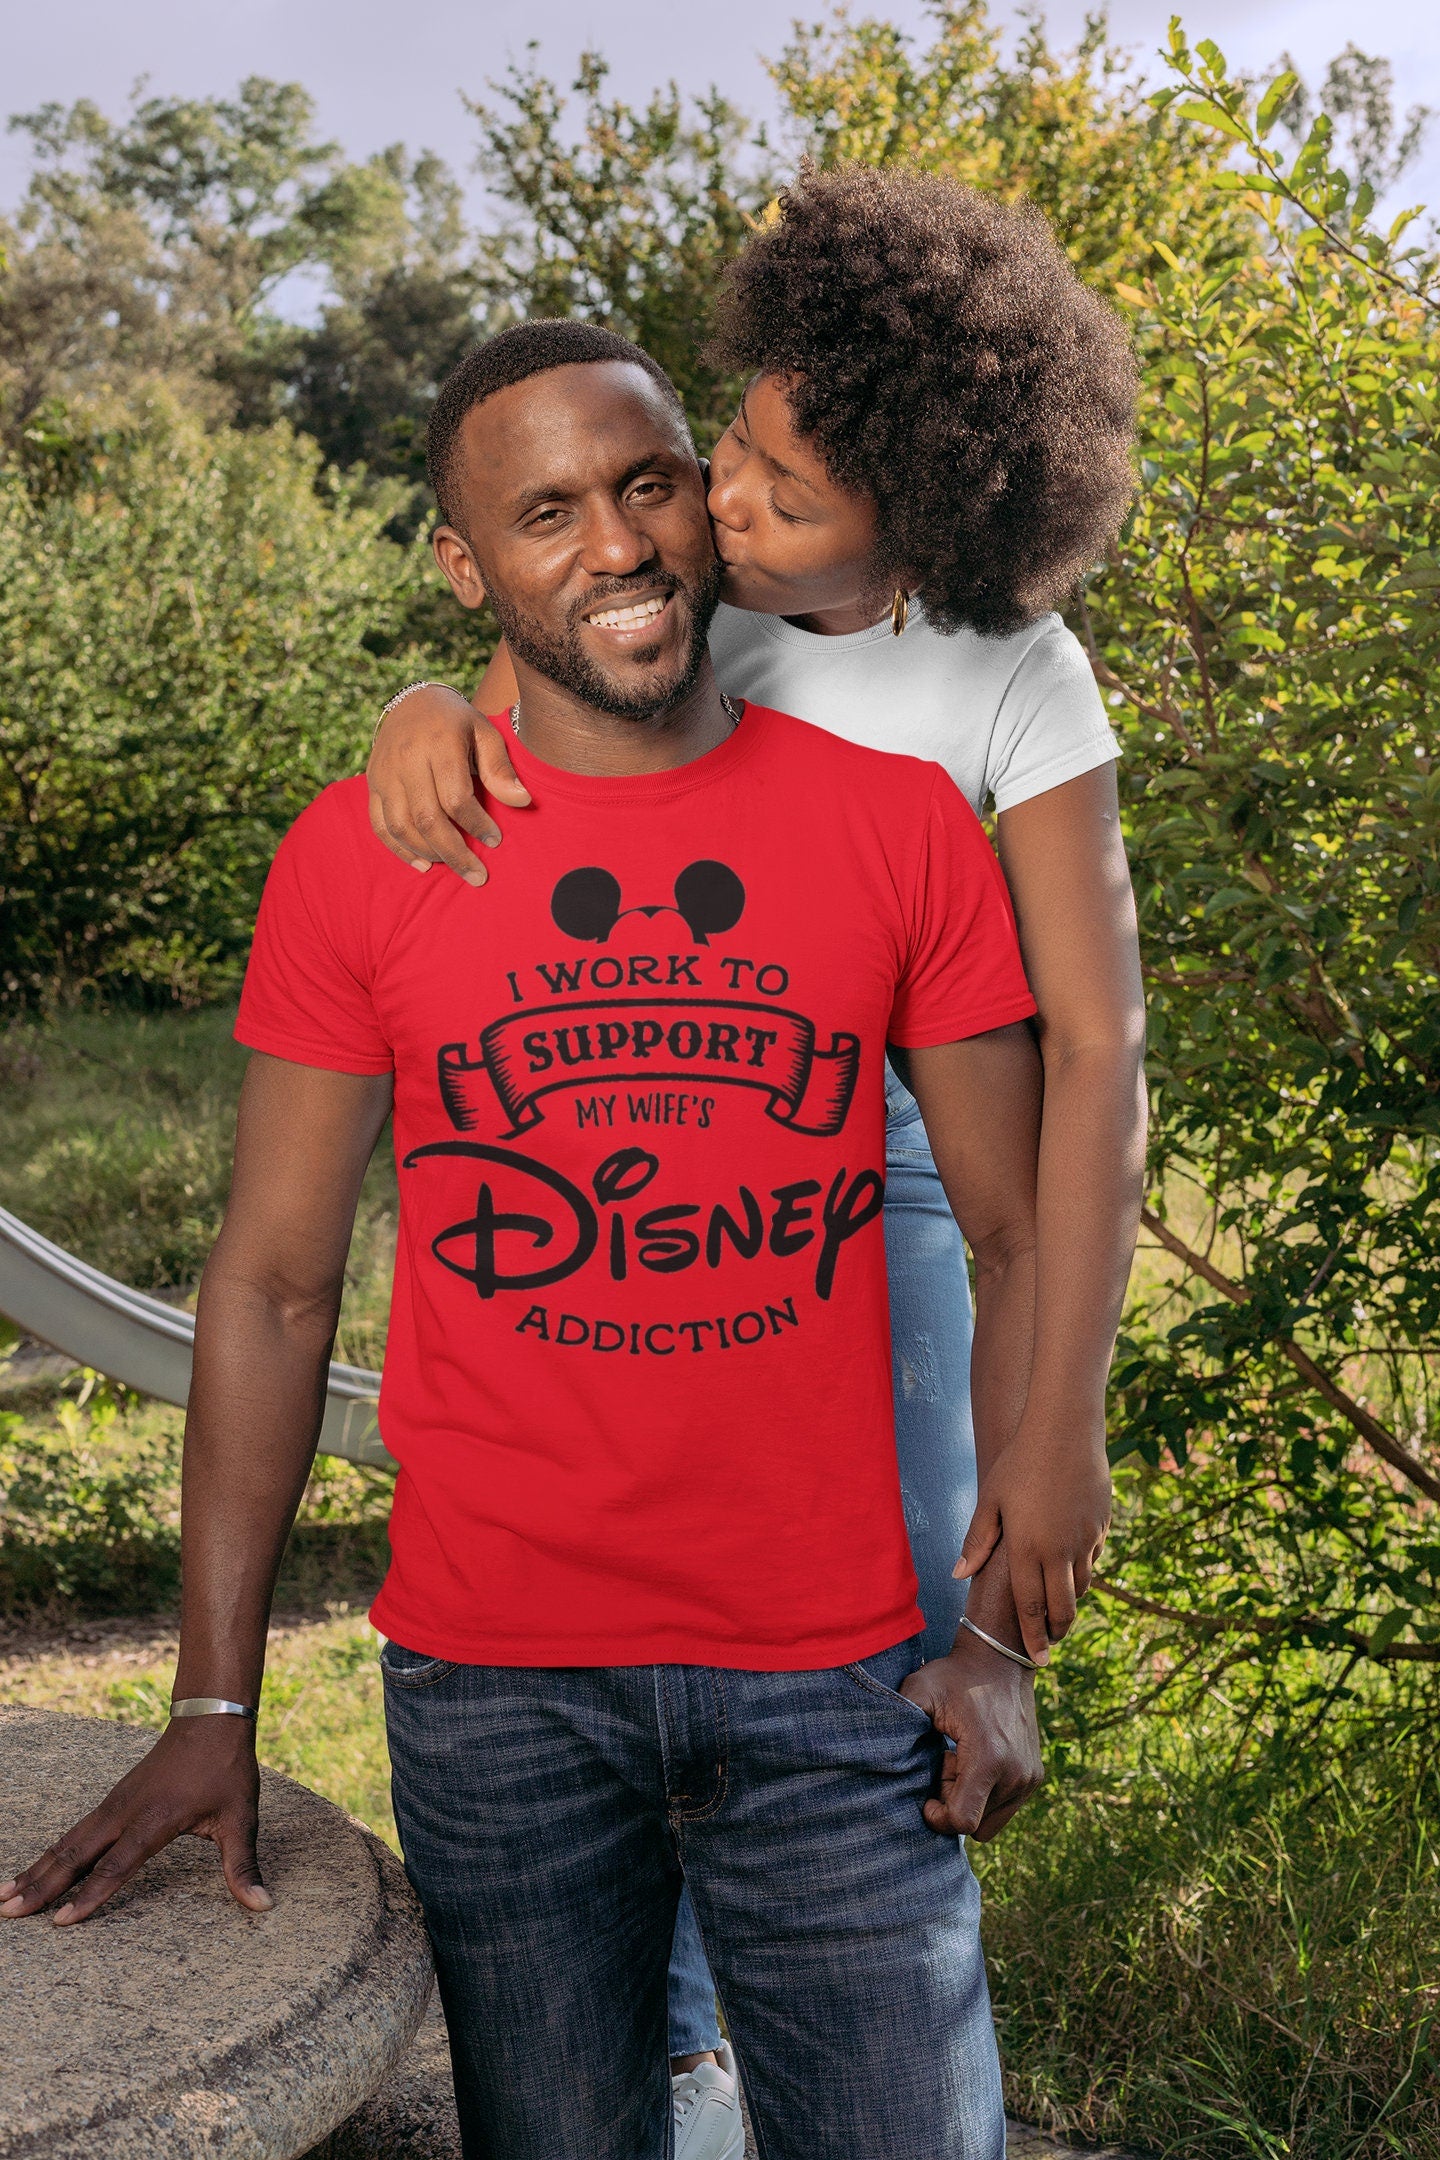 I Work To Support My Wife's Disney Addiction Shirt, Disney Trip Shirt, Vacation Shirt, Funny Shirt, Husband Shirt